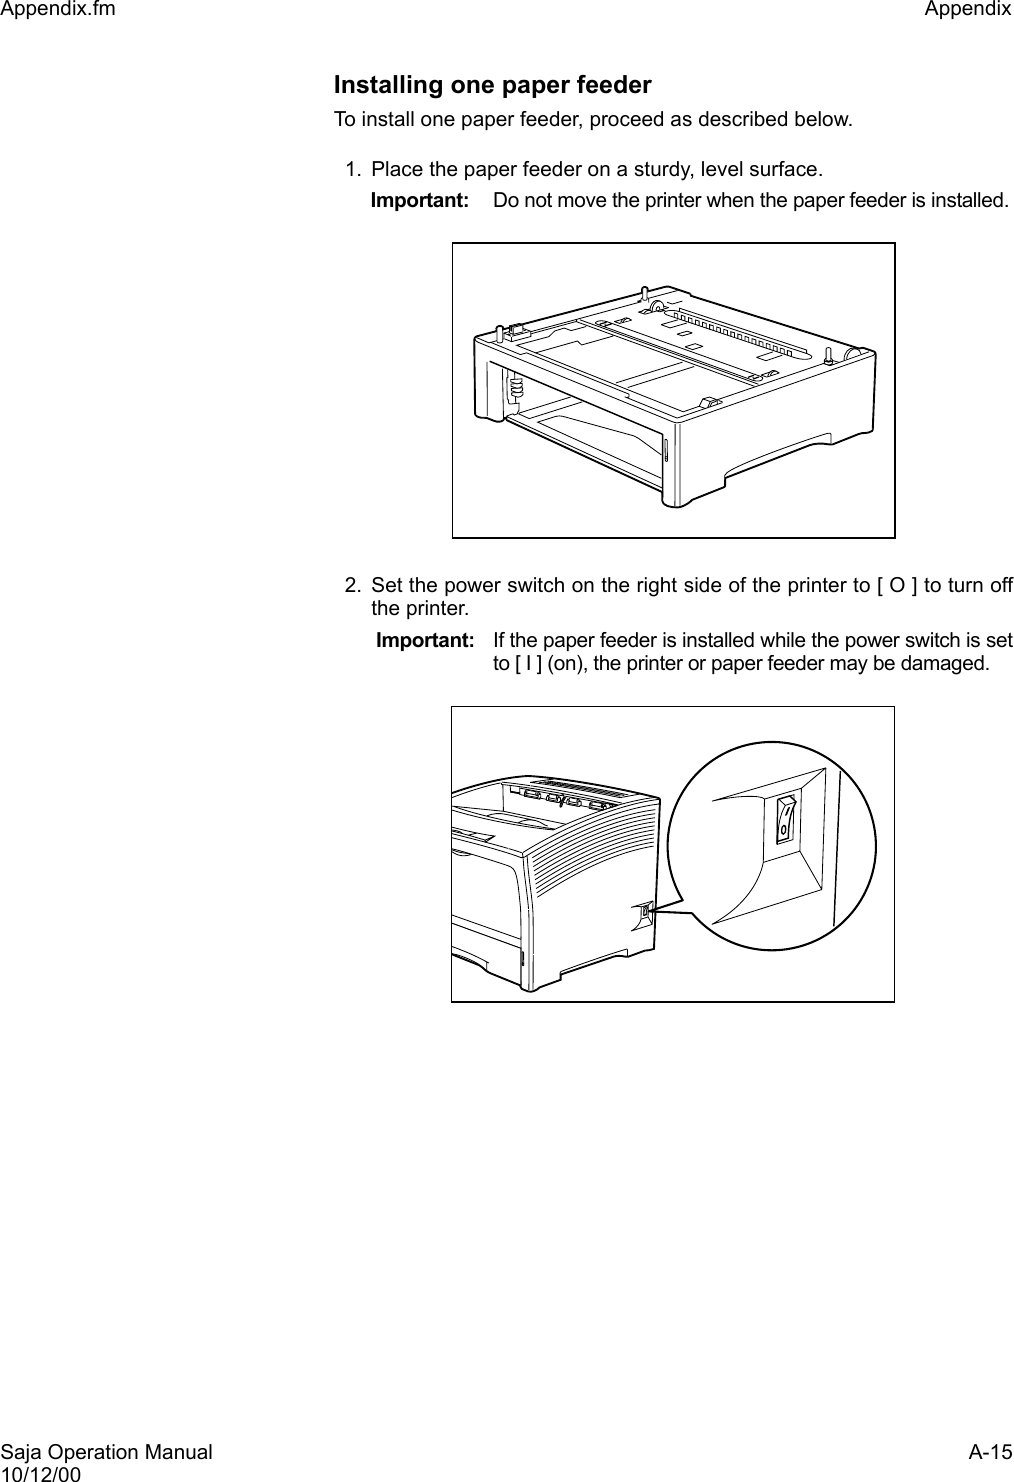 Saja Operation Manual A-1510/12/00Appendix.fm Appendix Installing one paper feederTo install one paper feeder, proceed as described below. 1. Place the paper feeder on a sturdy, level surface. Important: Do not move the printer when the paper feeder is installed.2. Set the power switch on the right side of the printer to [ O ] to turn offthe printer.  Important: If the paper feeder is installed while the power switch is setto [ I ] (on), the printer or paper feeder may be damaged. 